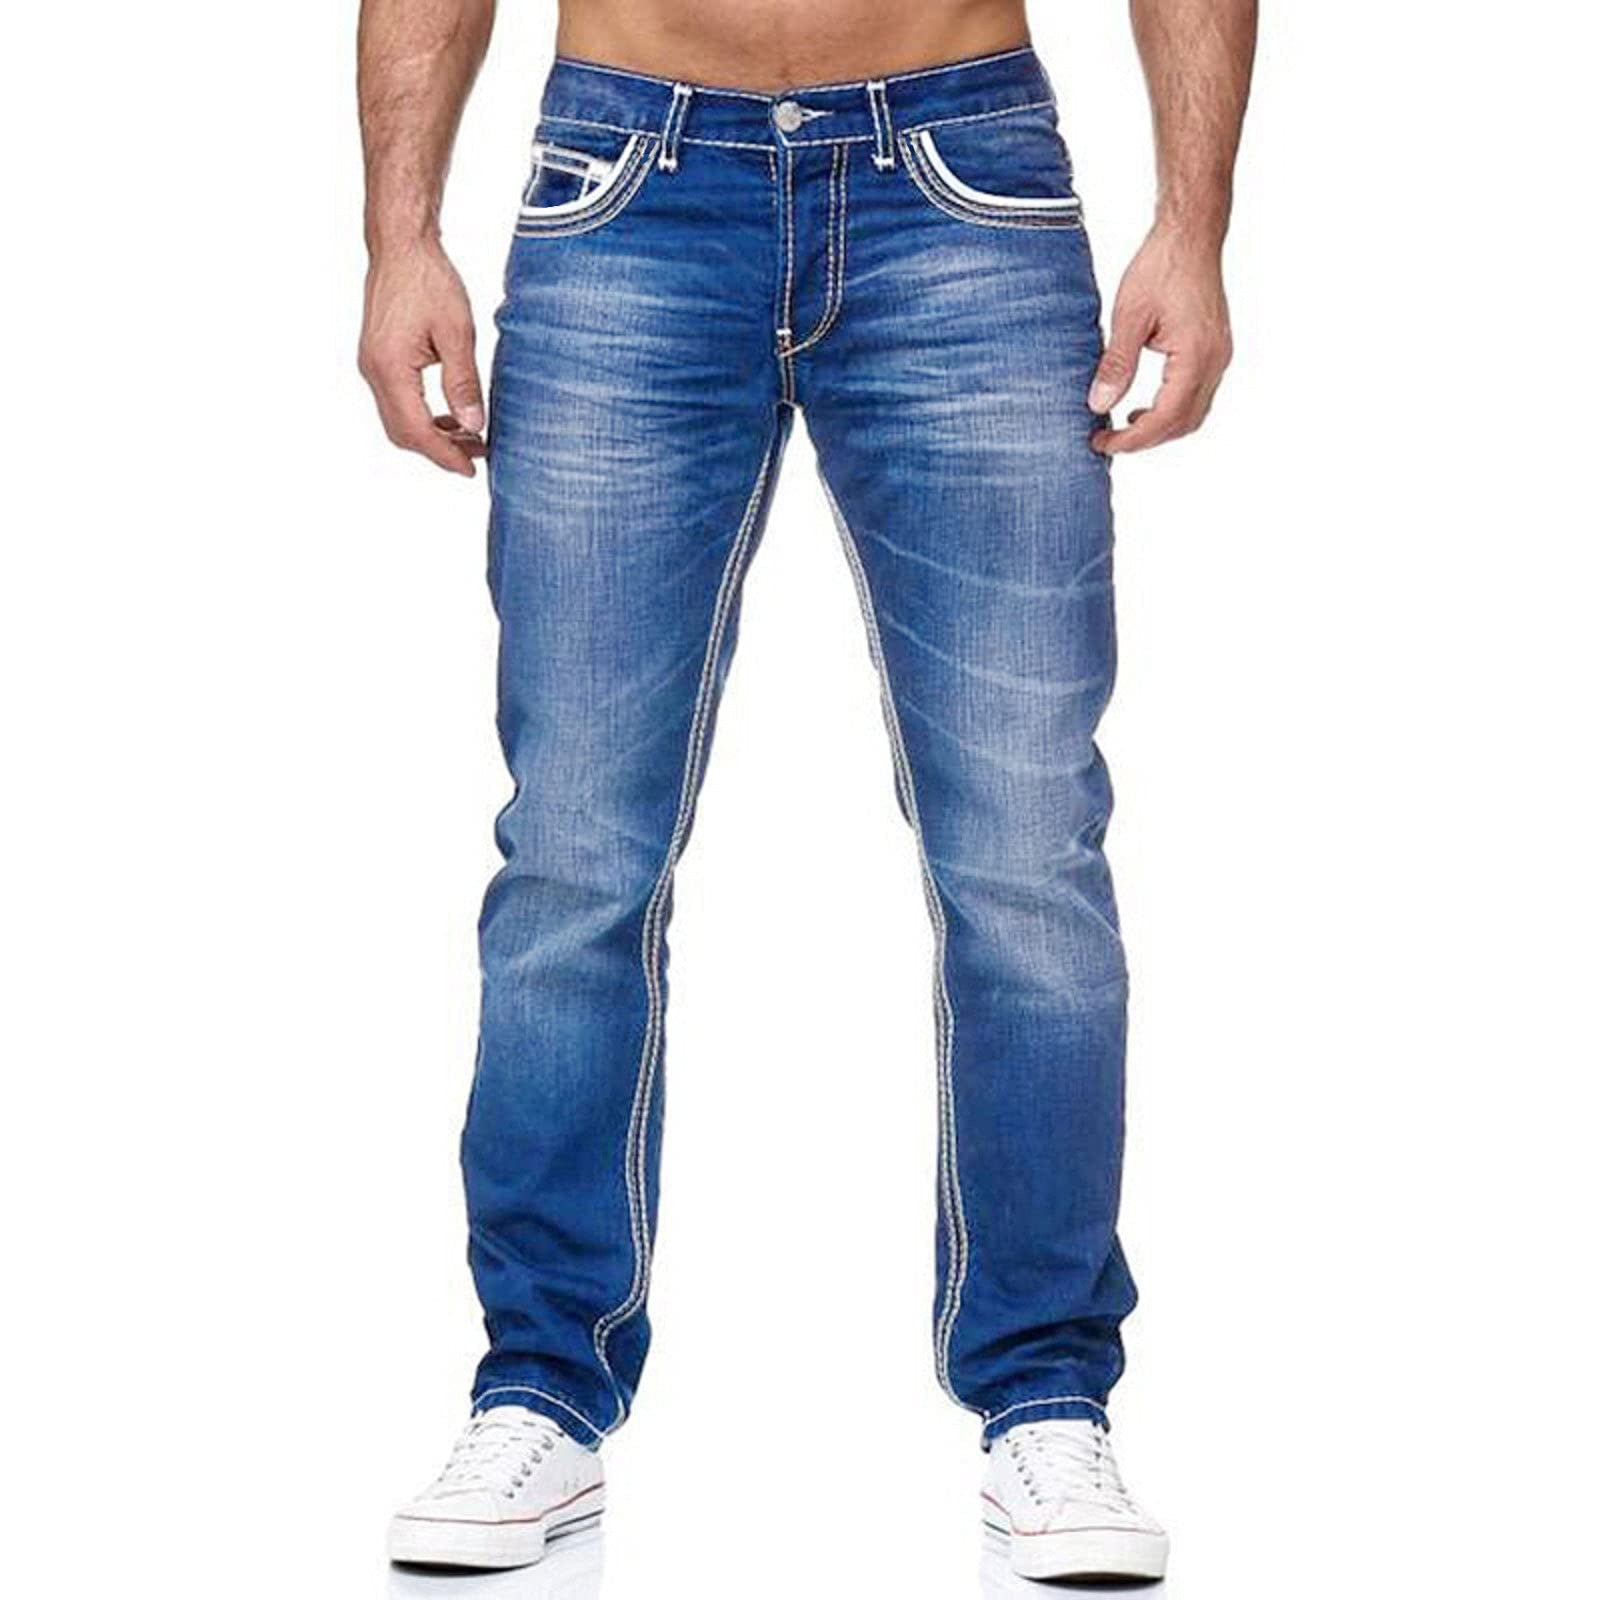 Men Jeans With Pockets Straight Pants Business Casual Daily Streetwear Trousers Men's Clothing